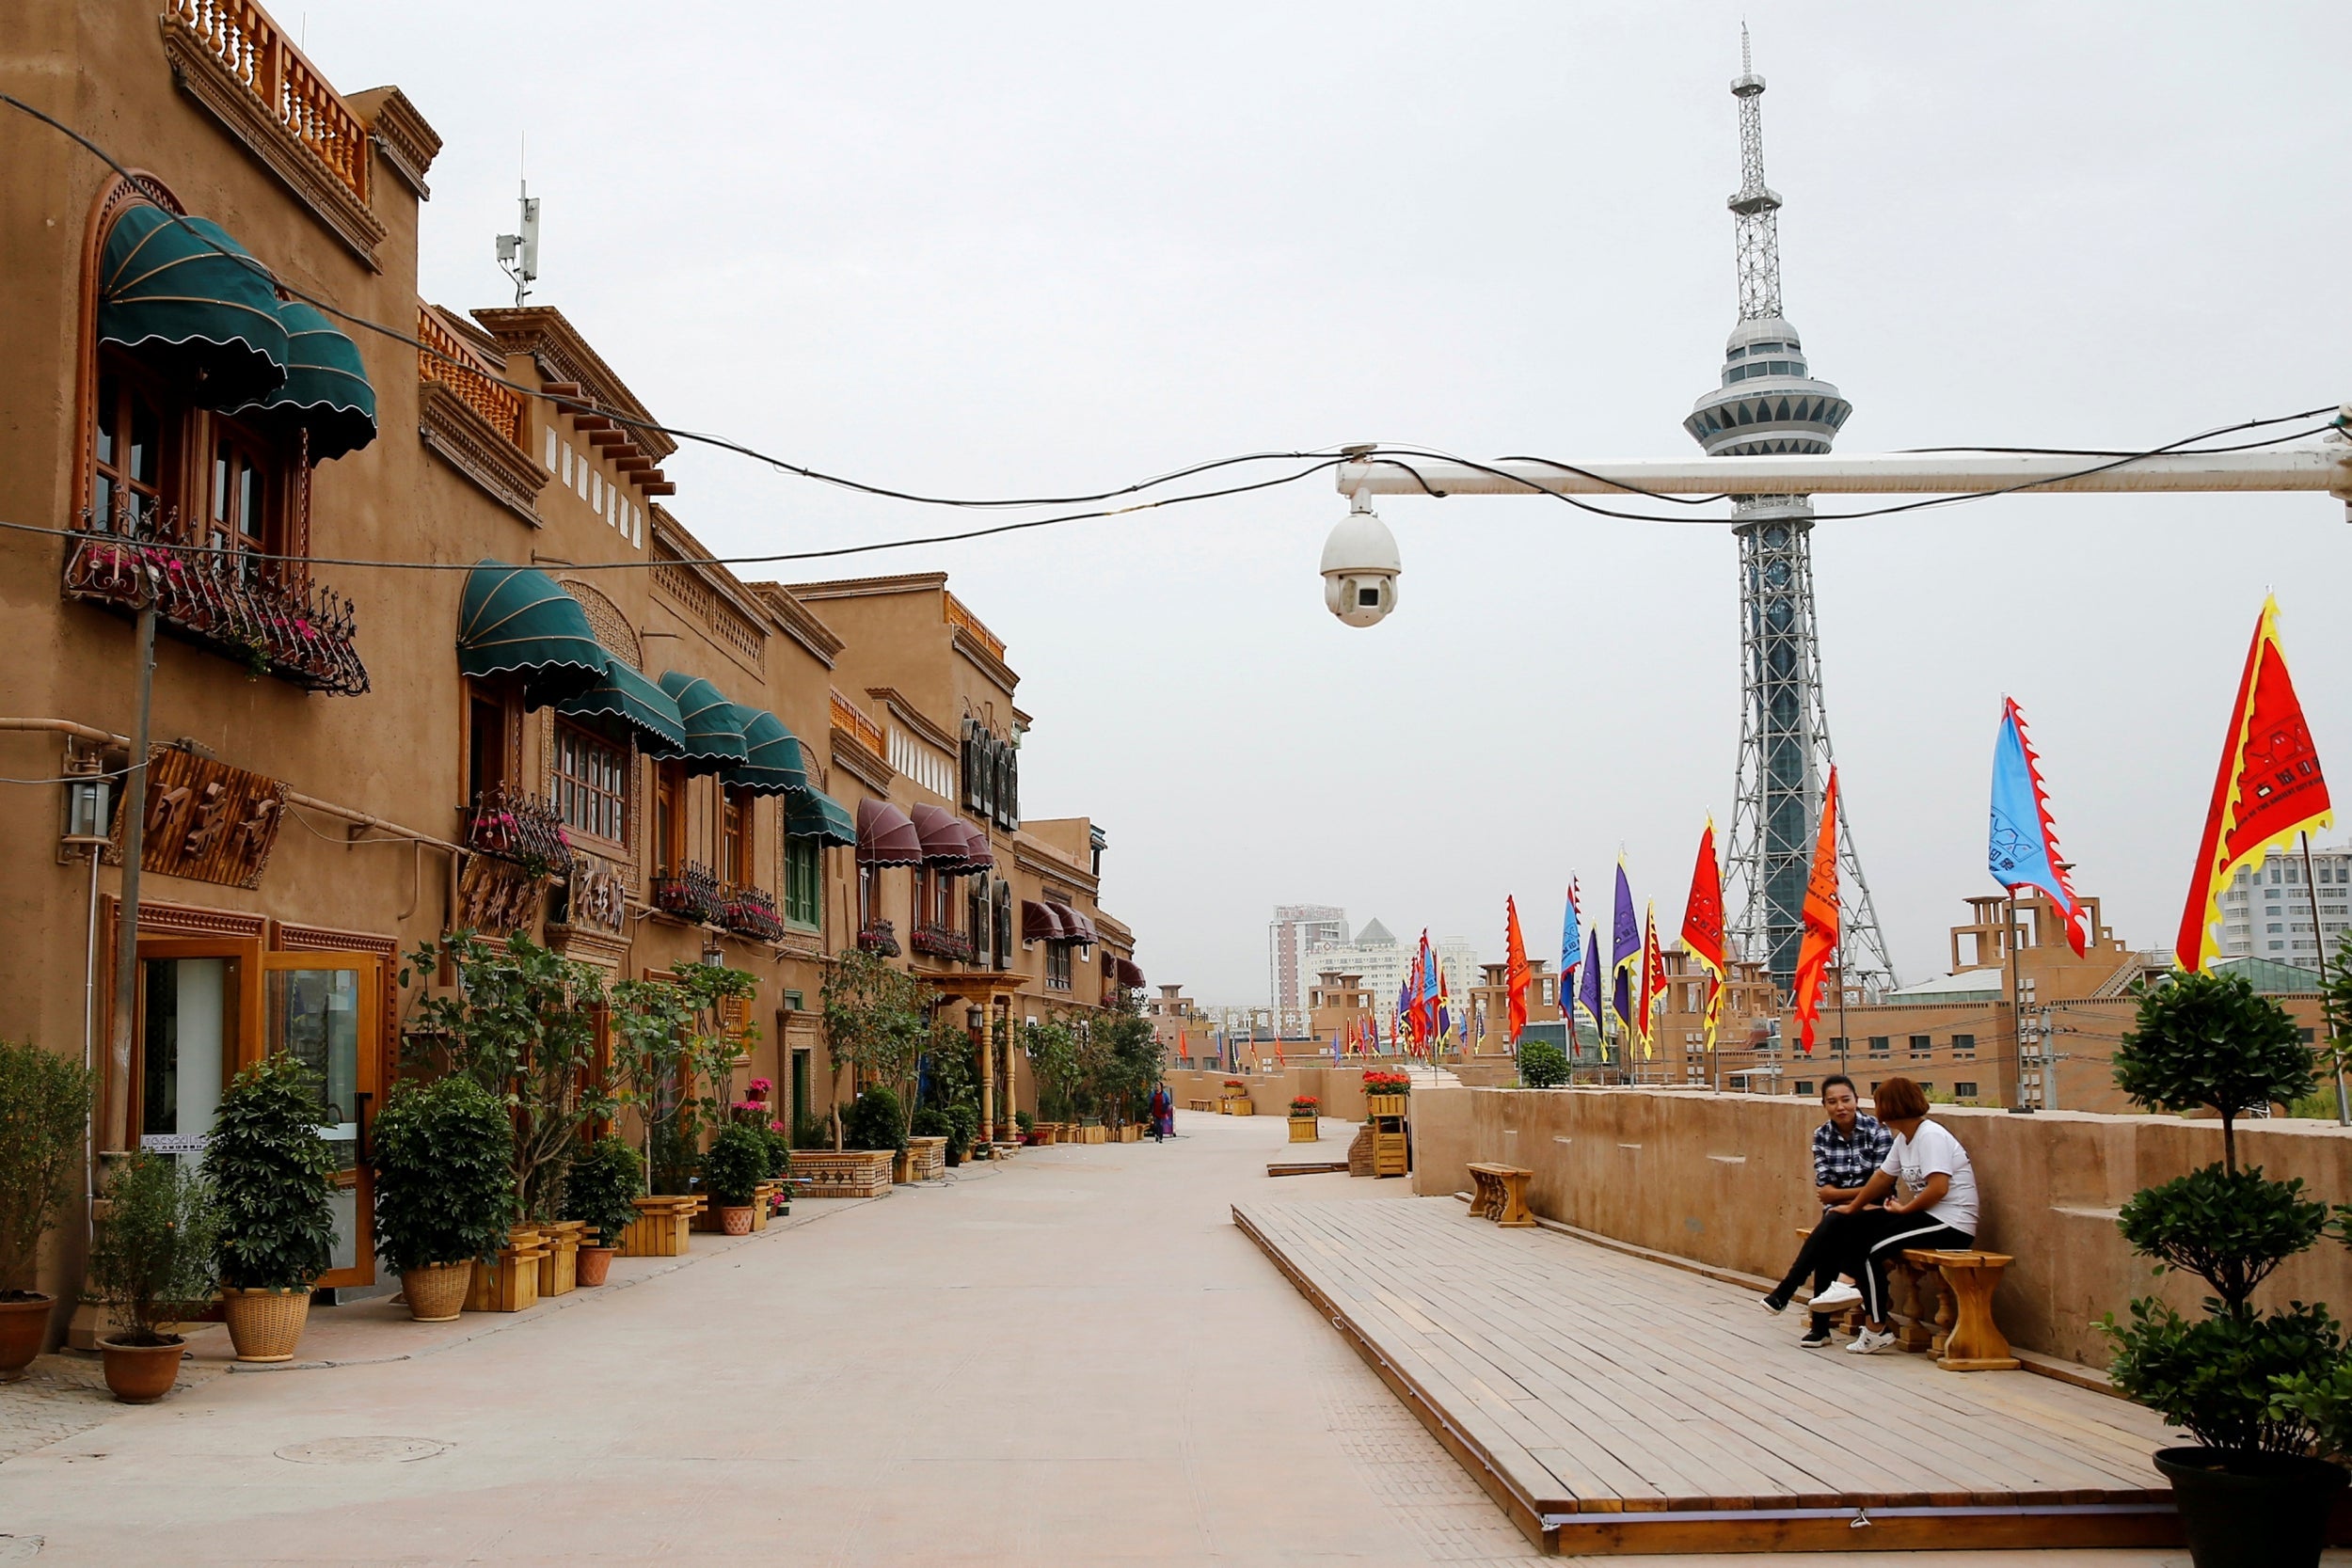 A security camera is placed in the Old City in Kashgar, Xinjiang, where the Muslim population has been subjected to unprecedented state intervention